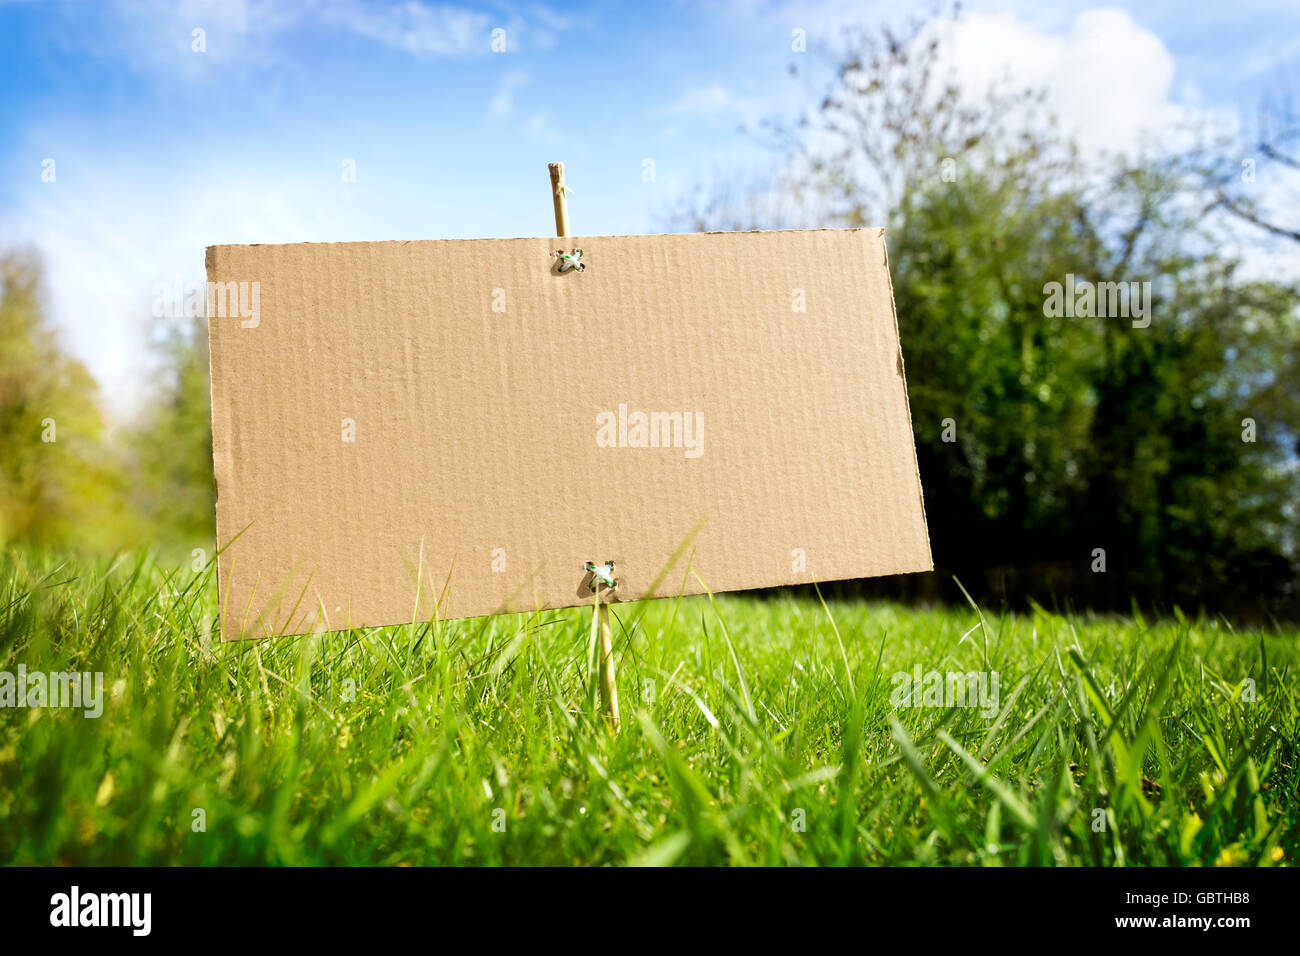 Blank cardboard sign on grass in nature ready for text message Stock Photo